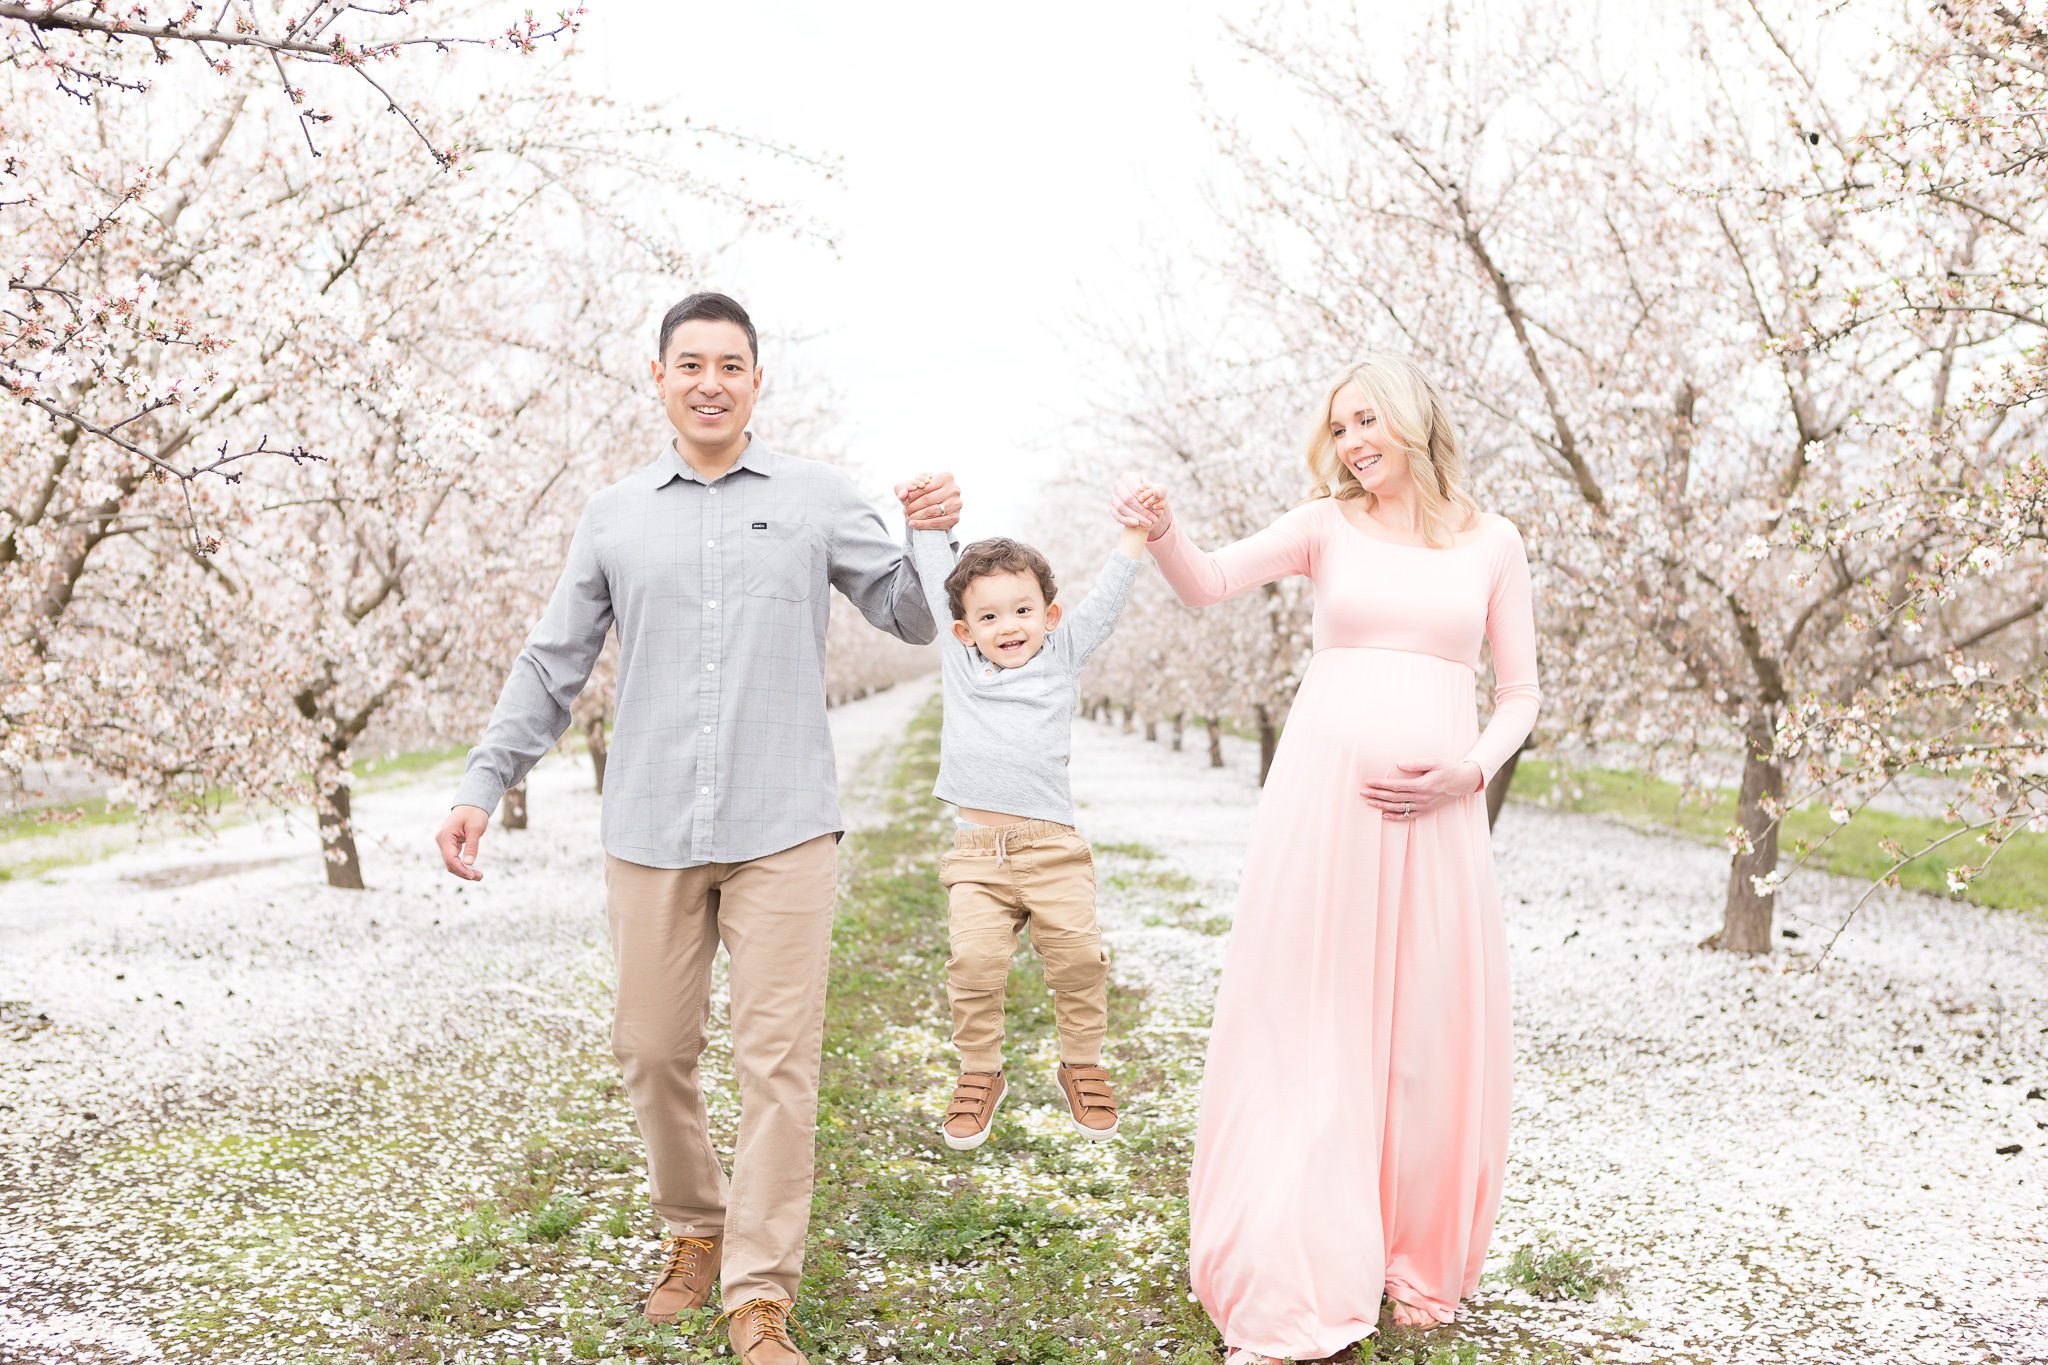 maternity session, pregnancy photos, pink maternity dress, mom and dad walking in the blossoms swinging toddler